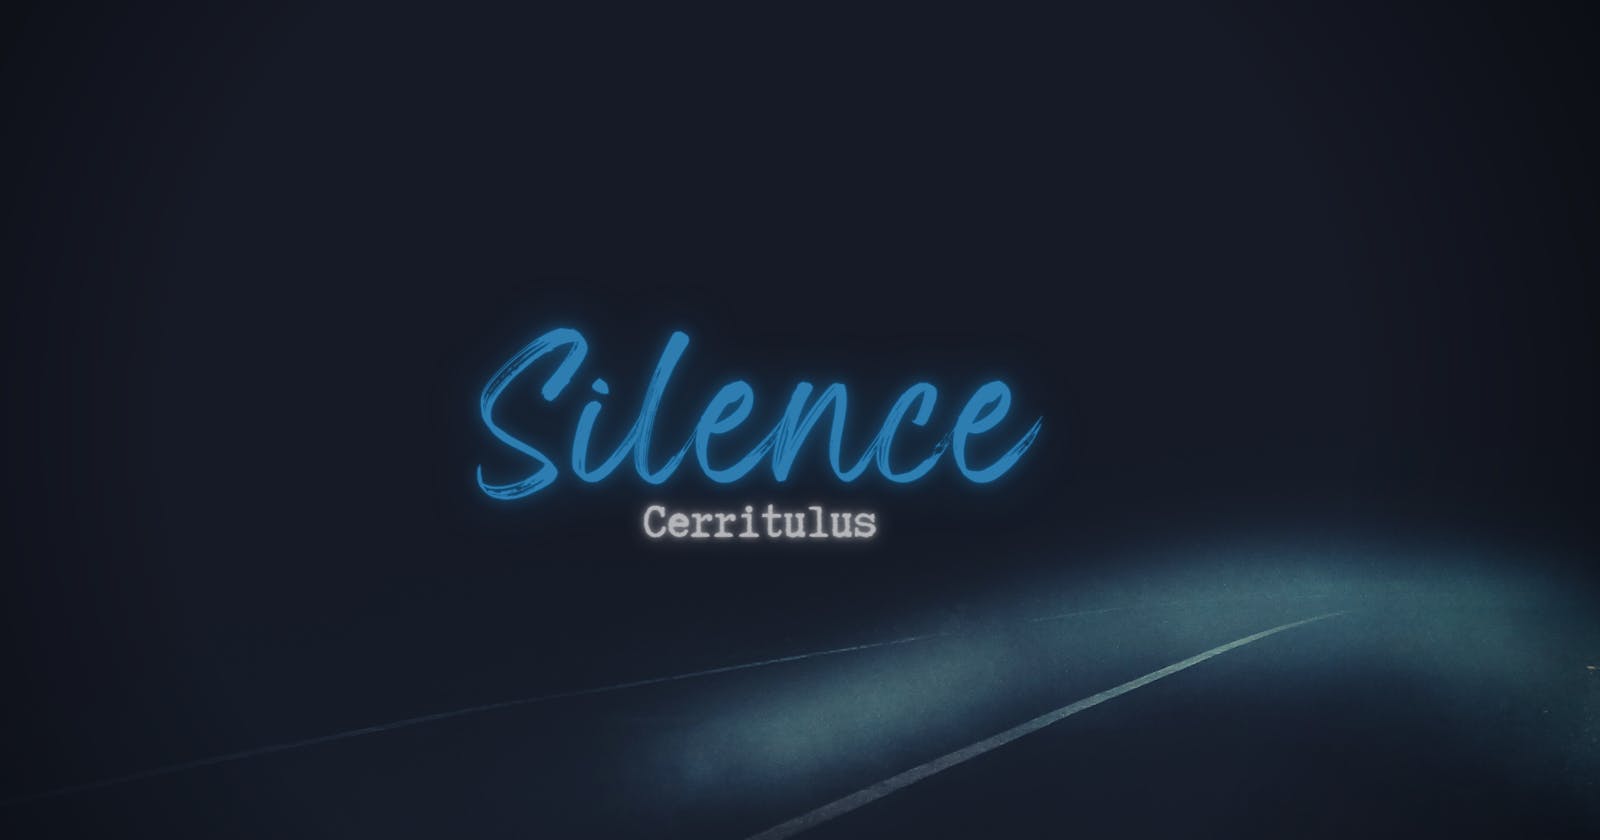 Silence by Cerritulus